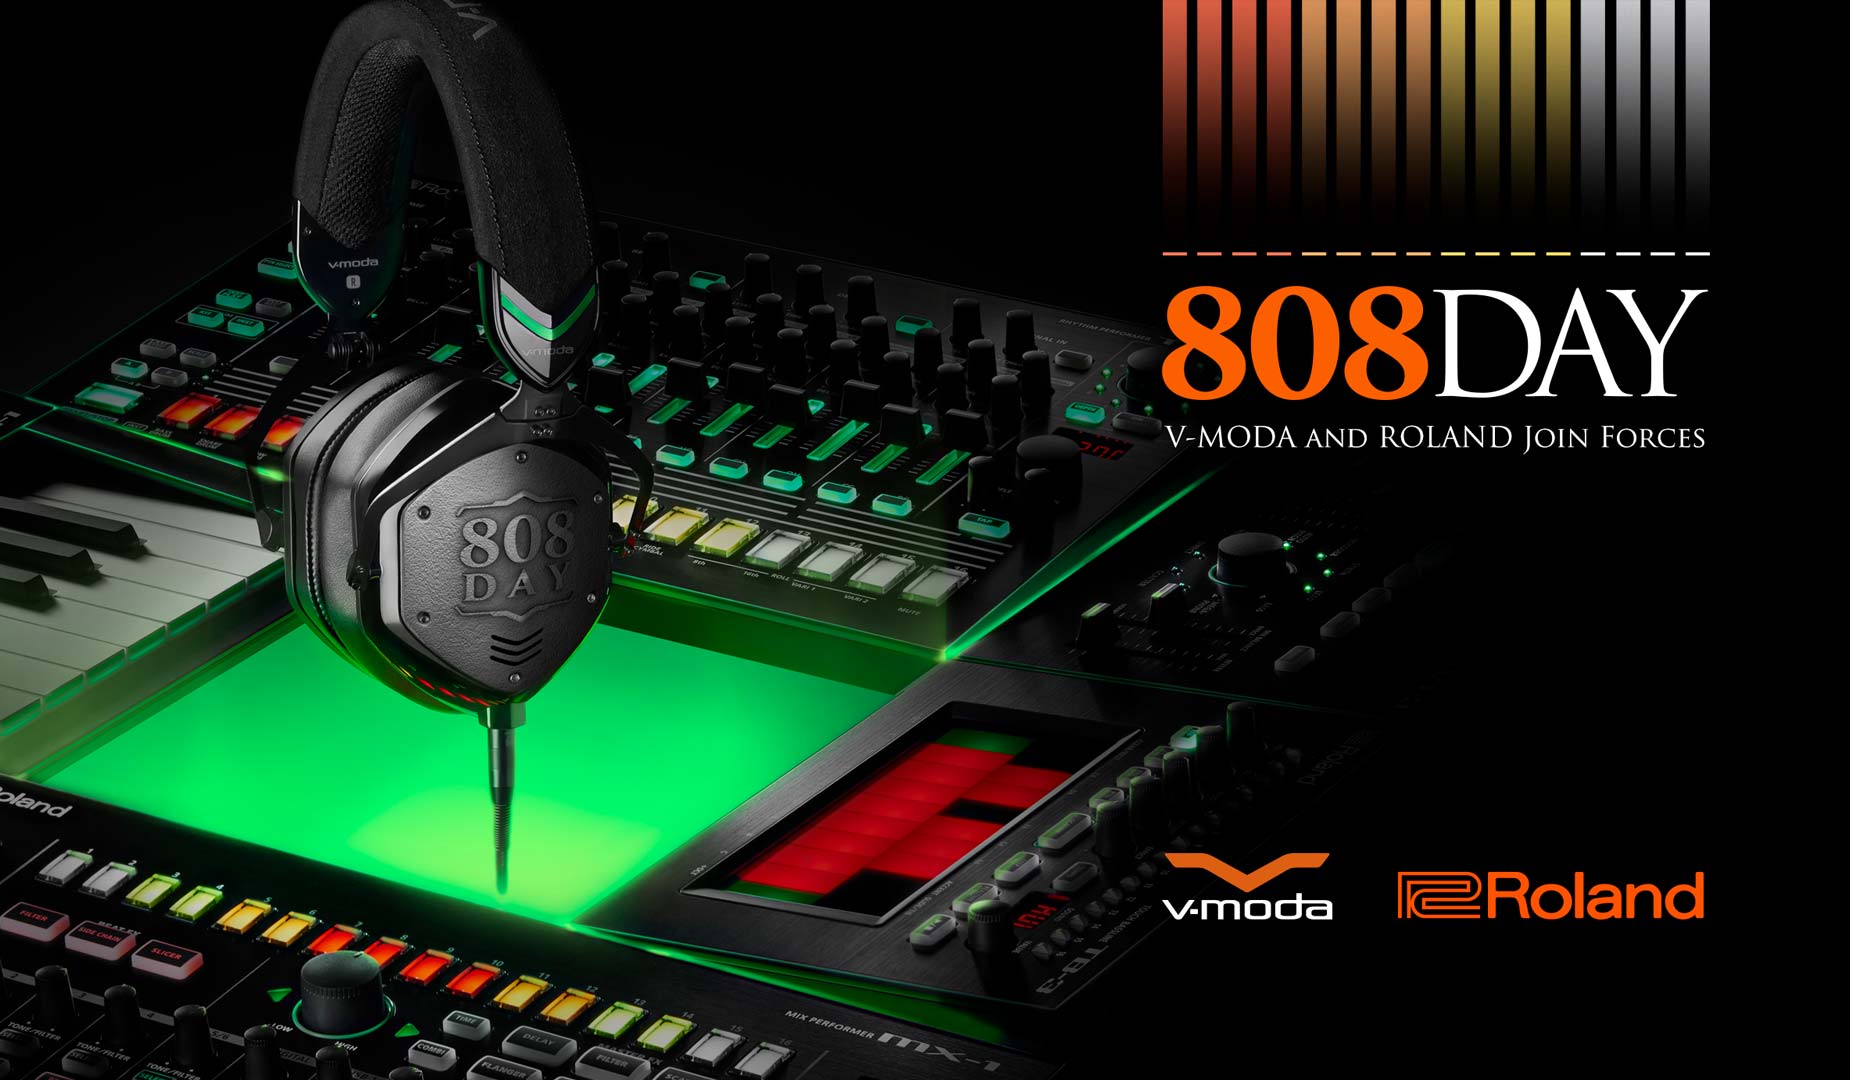 V-MODA and Roland Join Forces